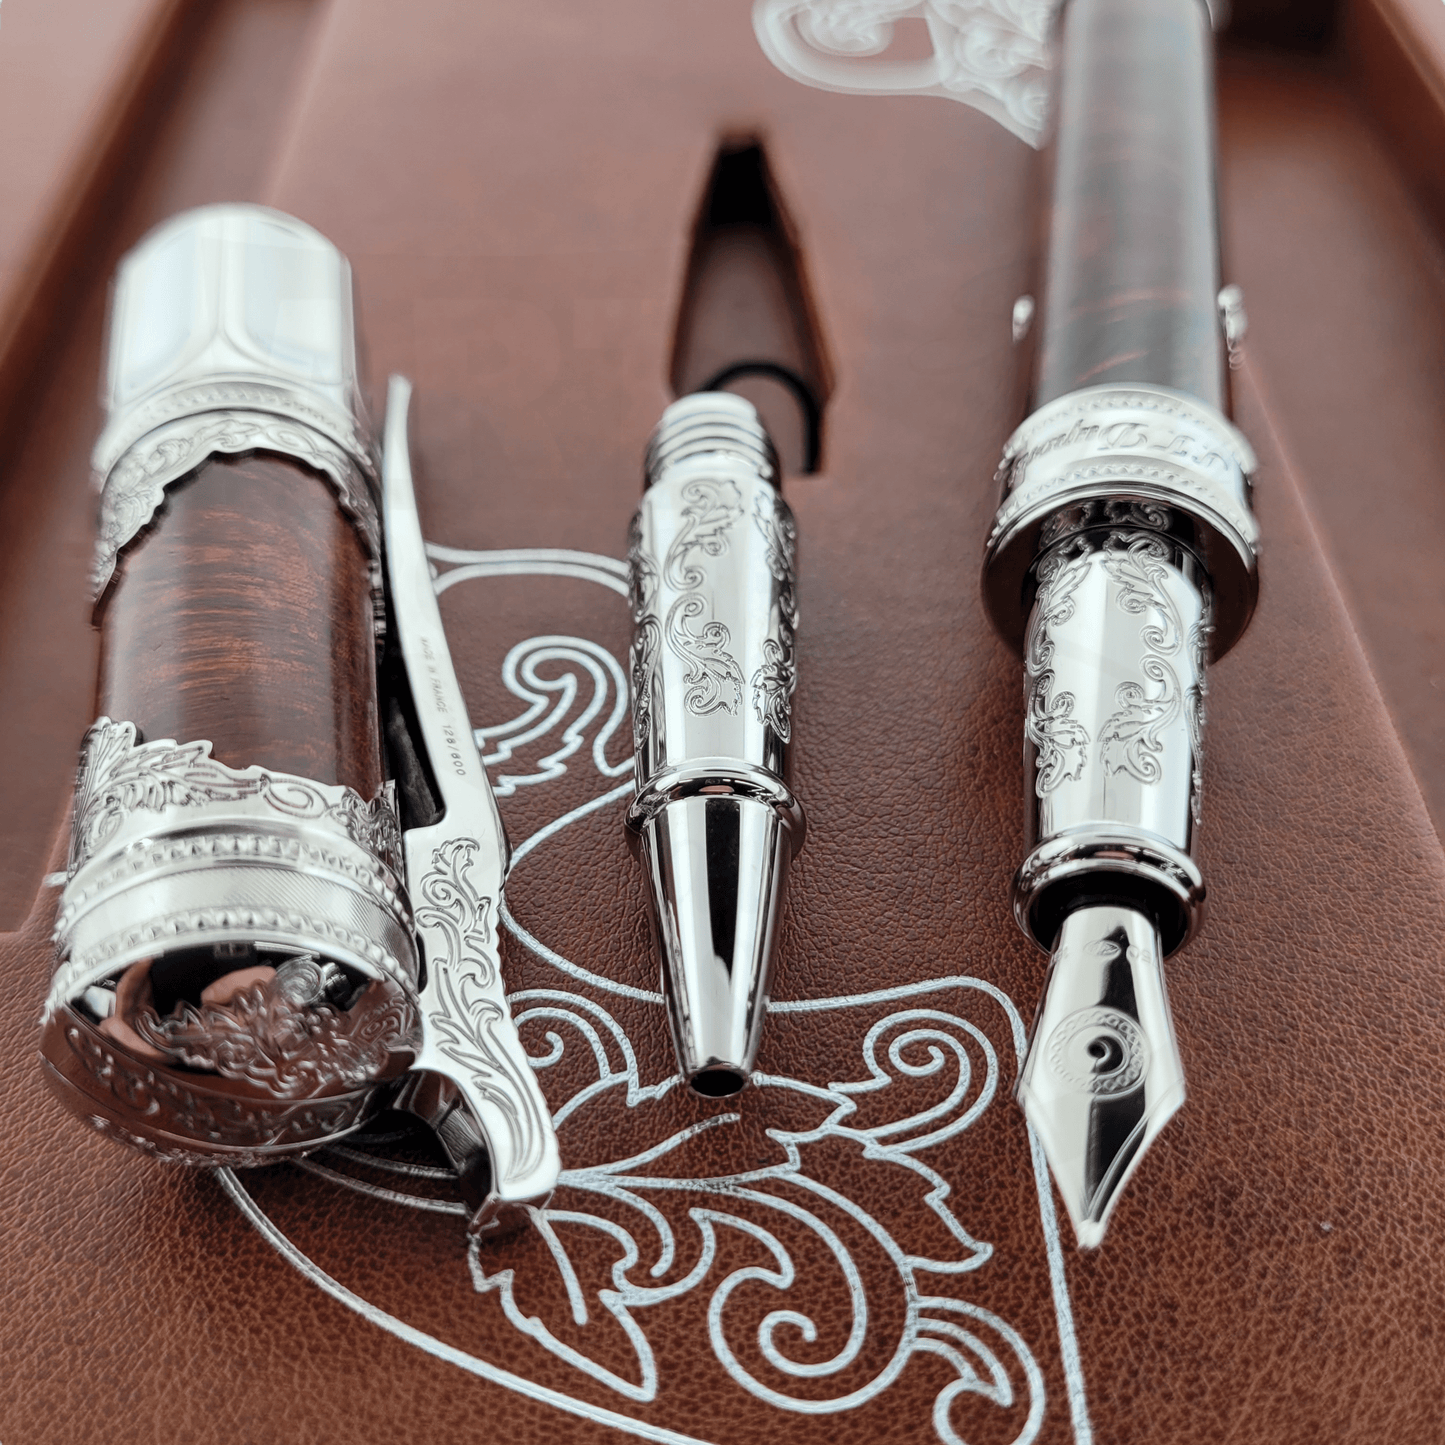 S.T. Dupont wild west premium engraved fountain pen, engraved rollerball convertor, and ornate cap laying side by side on brown display box